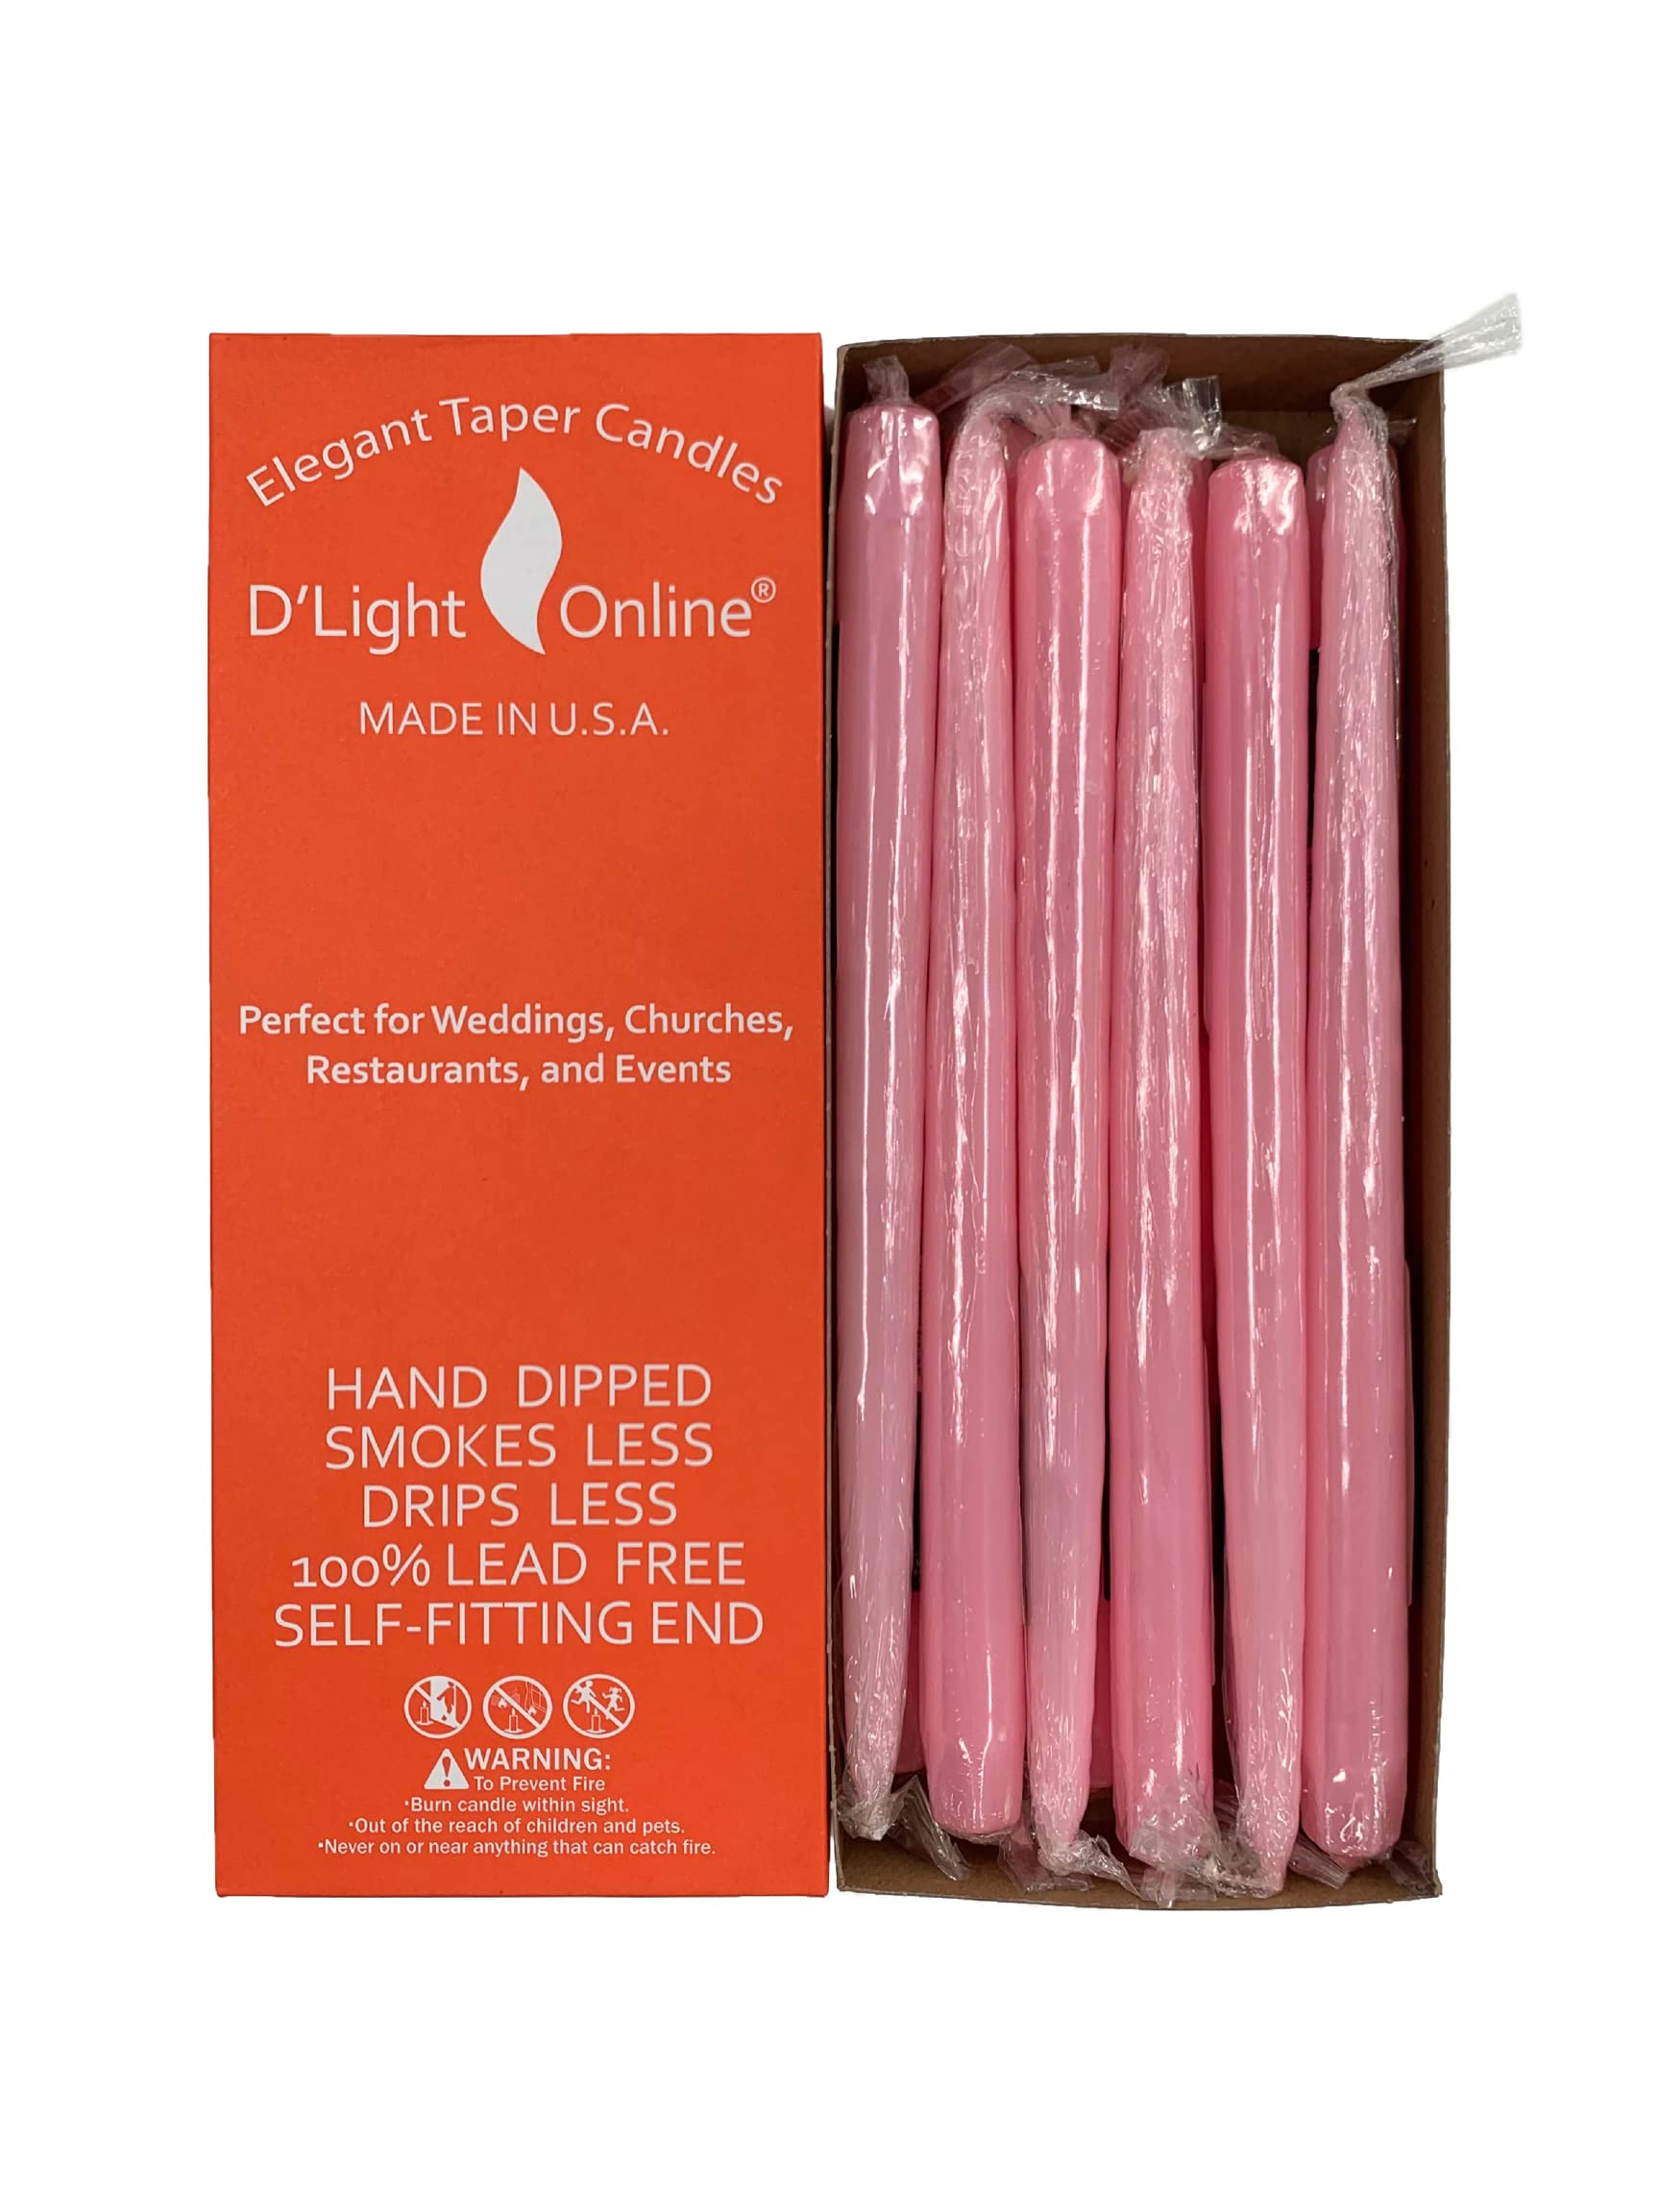 Dlight Online D'light Online Elegant Unscented Pink Taper Premium Quality Candles Hand-Dipped, Dripless and Smokeless - Set of 12 Individually